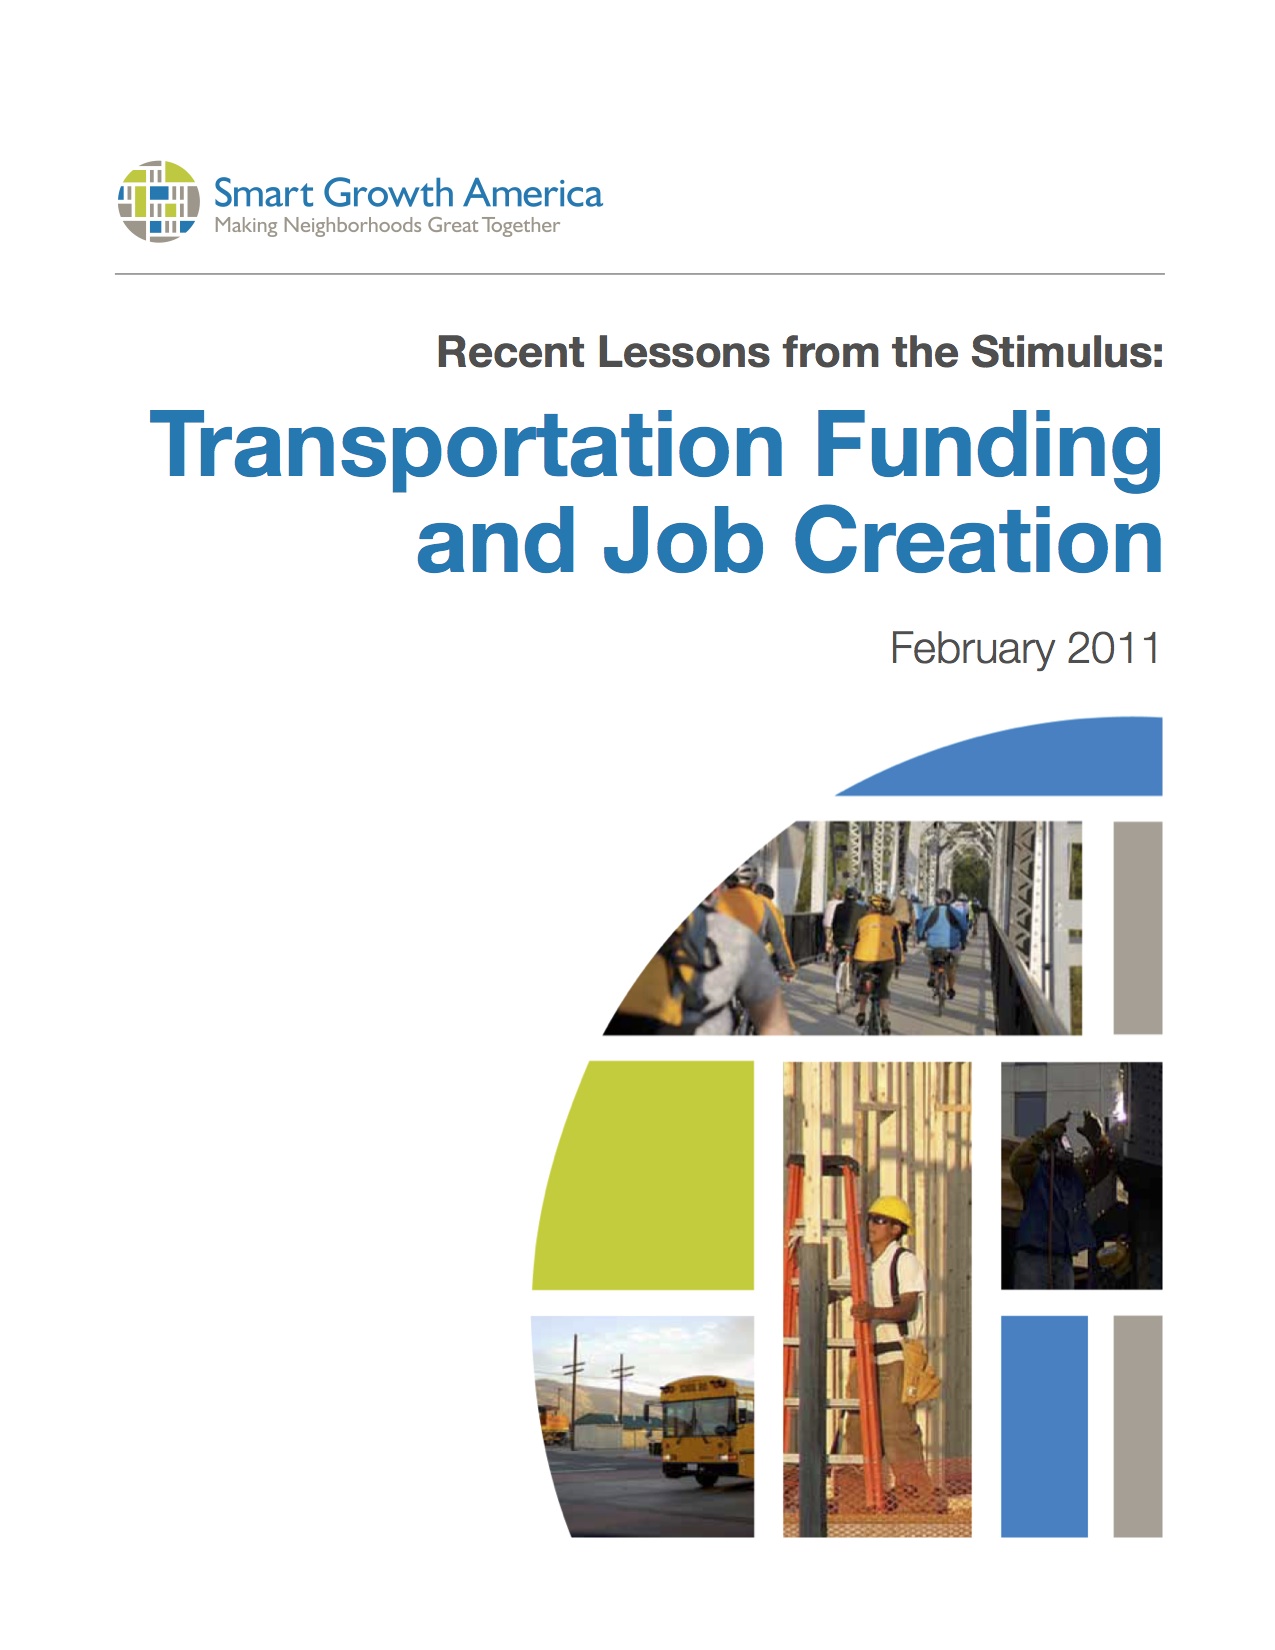 Recent Lessons from the Stimulus: Transportation Funding and Job Creation